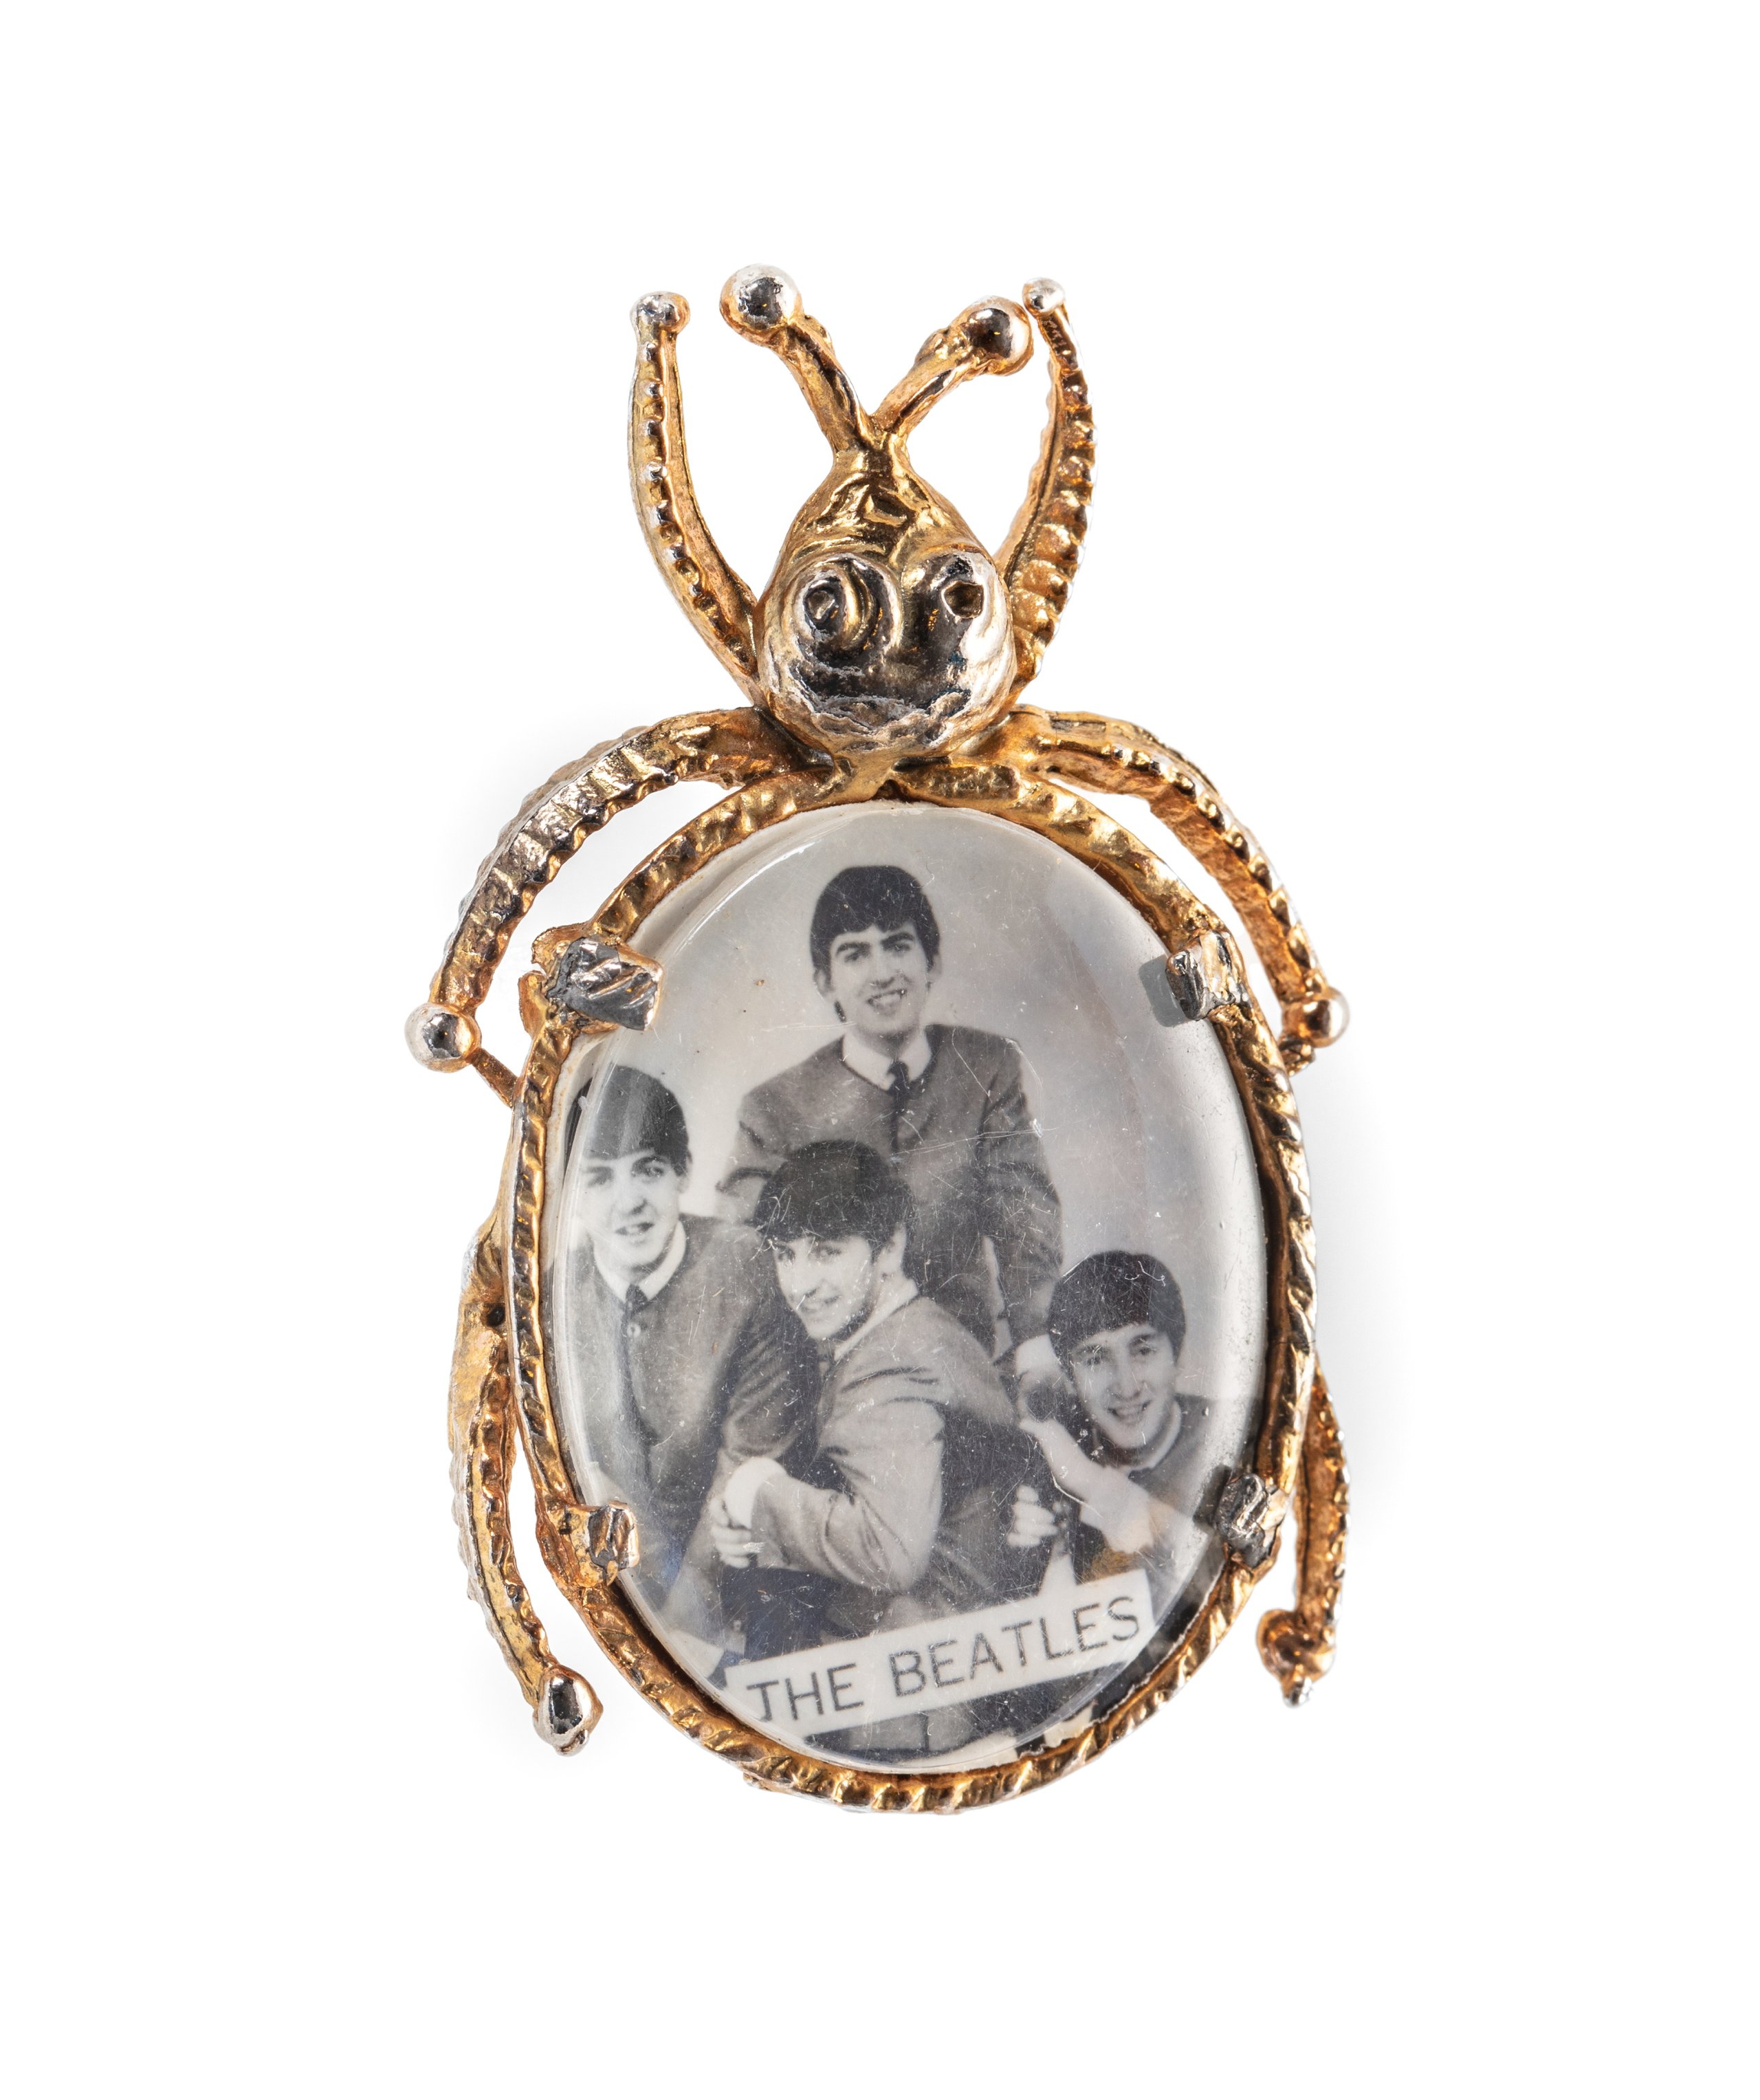 Powerhouse Collection - 'The Beatles' brooch